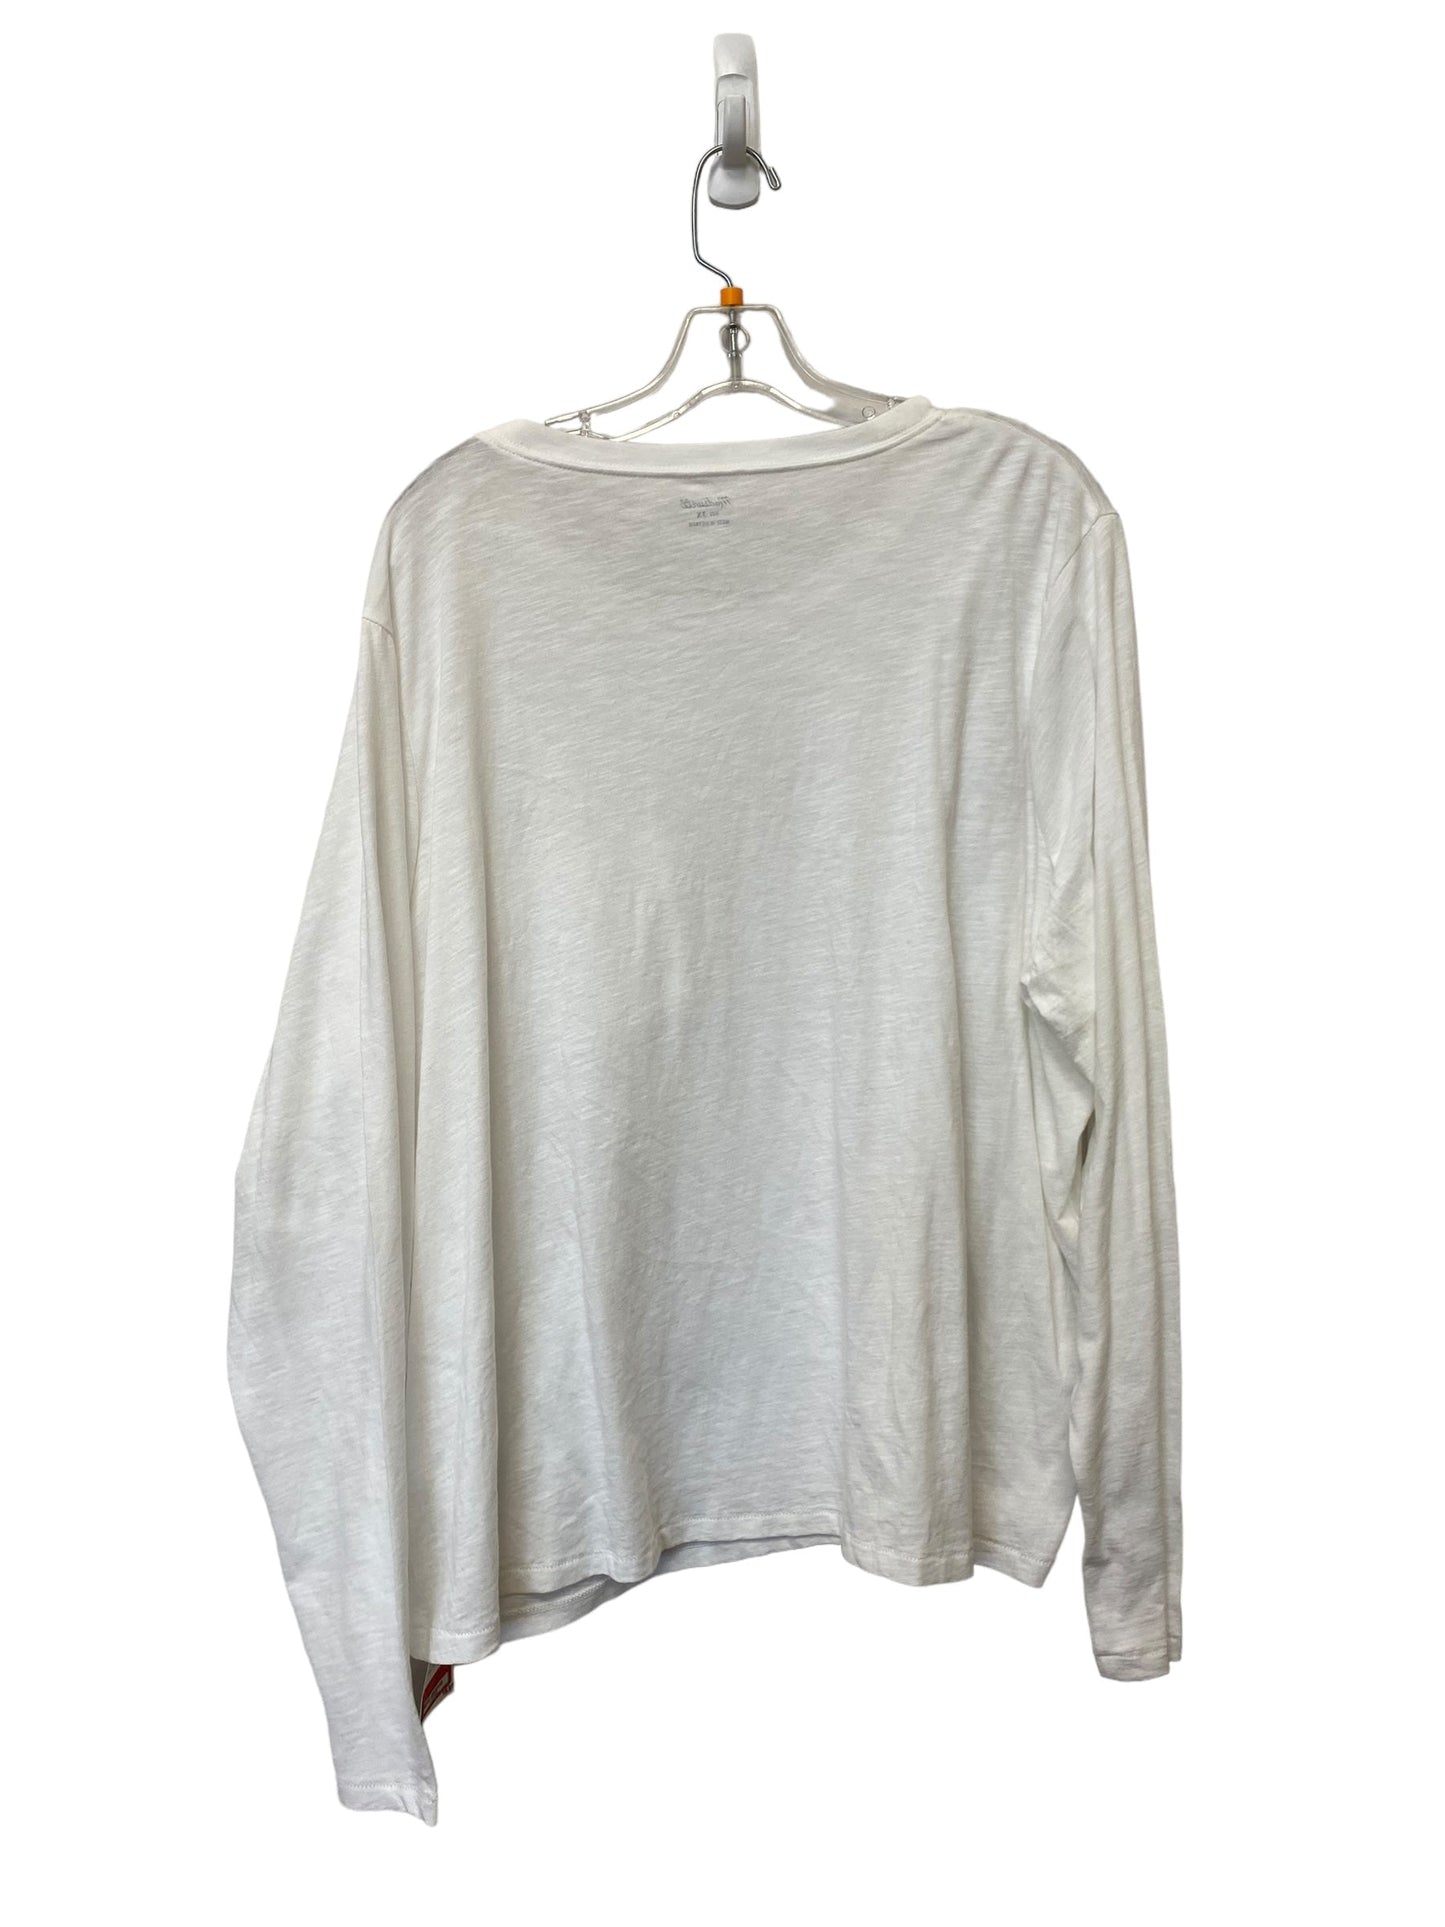 White Top Long Sleeve Madewell, Size 3x